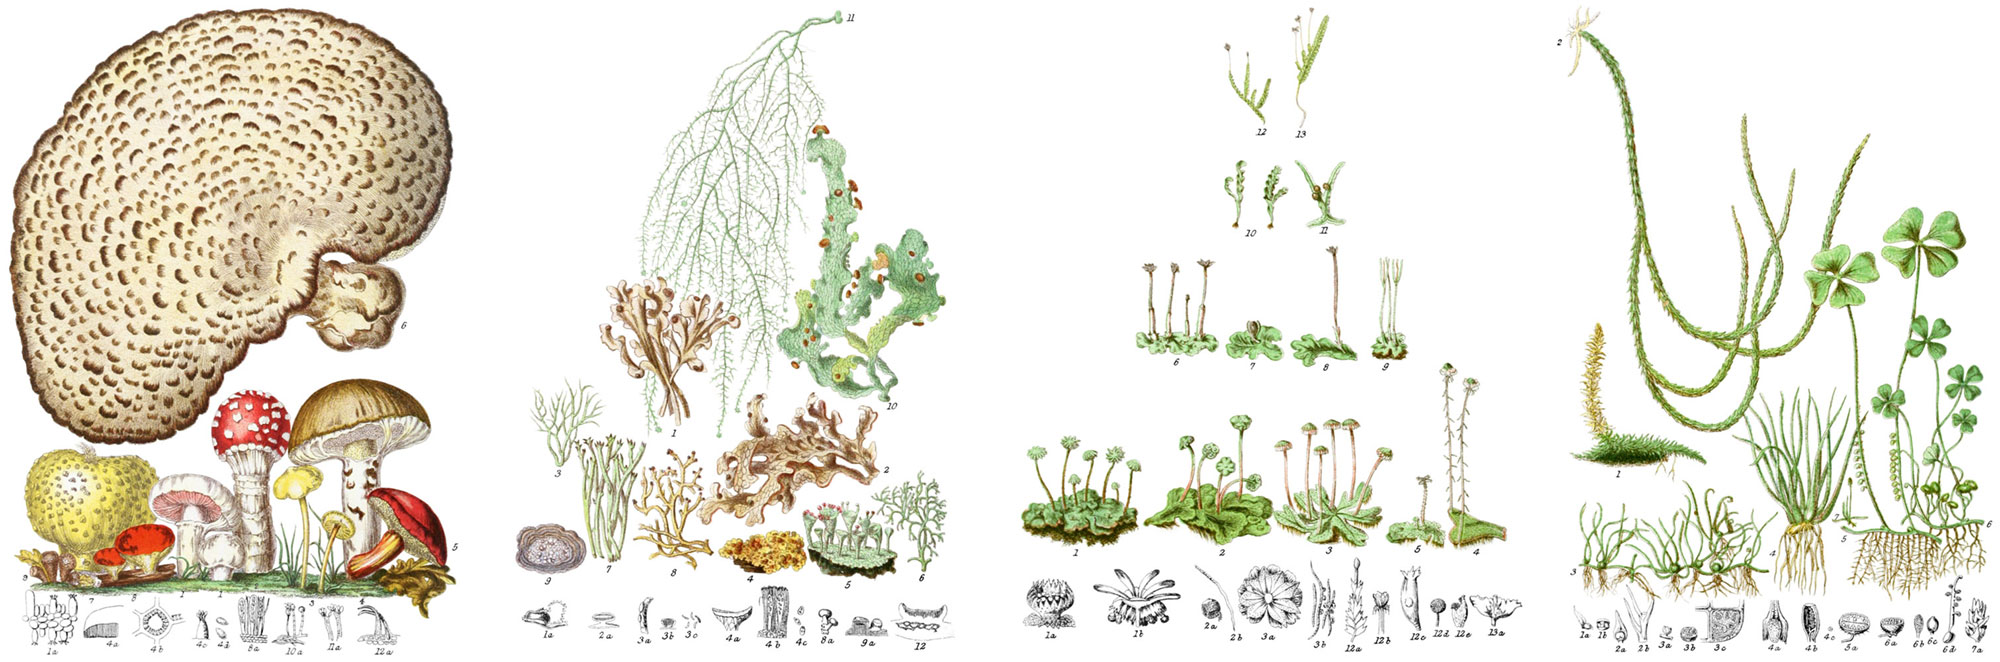 Fungus, Lichens, Marchantia, and Lycopodium